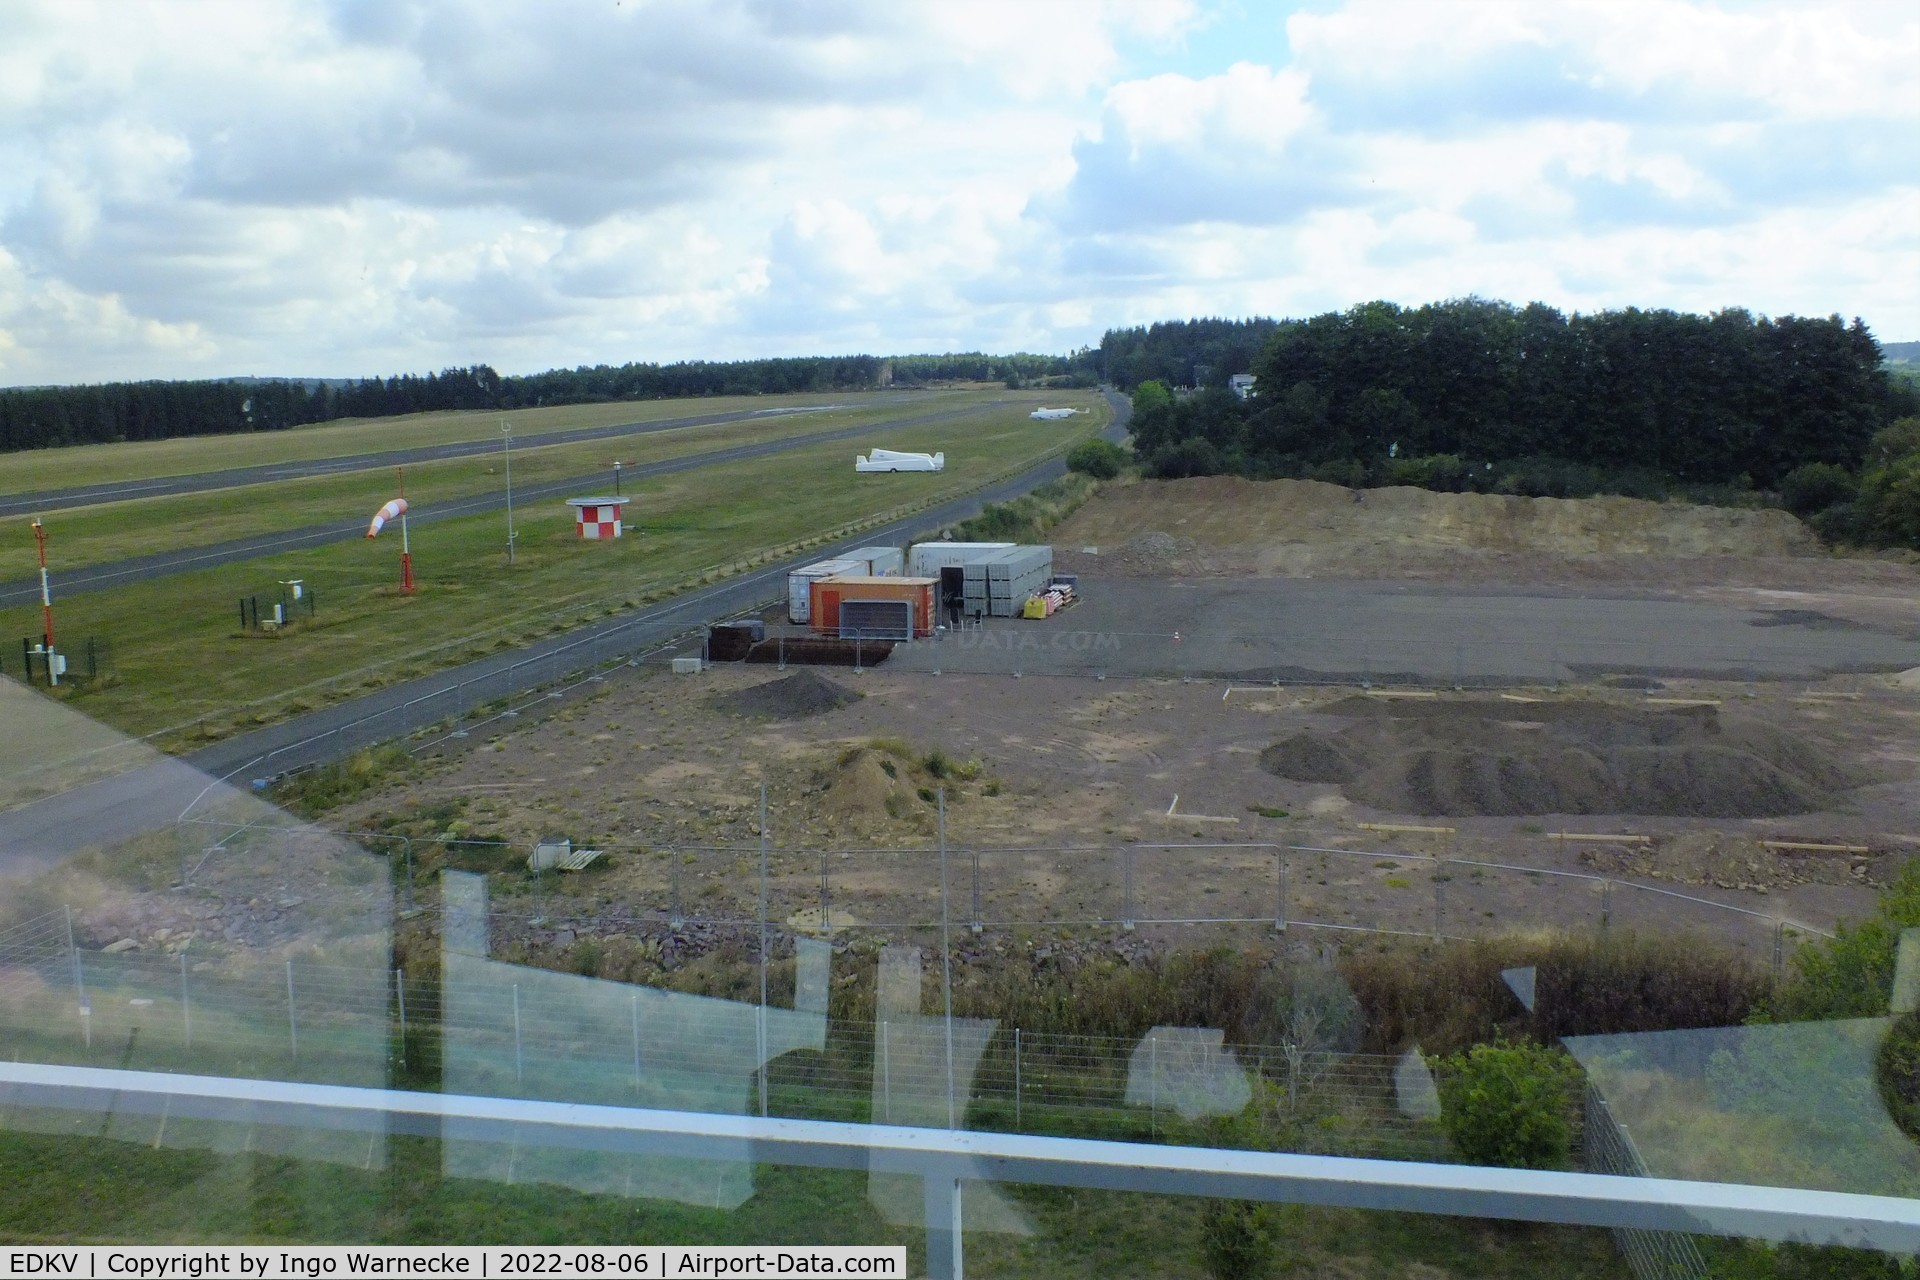 Dahlemer Binz Airport, Dahlem Germany (EDKV) - construction site (new hangars) east of the tower at Dahlemer Binz airfield